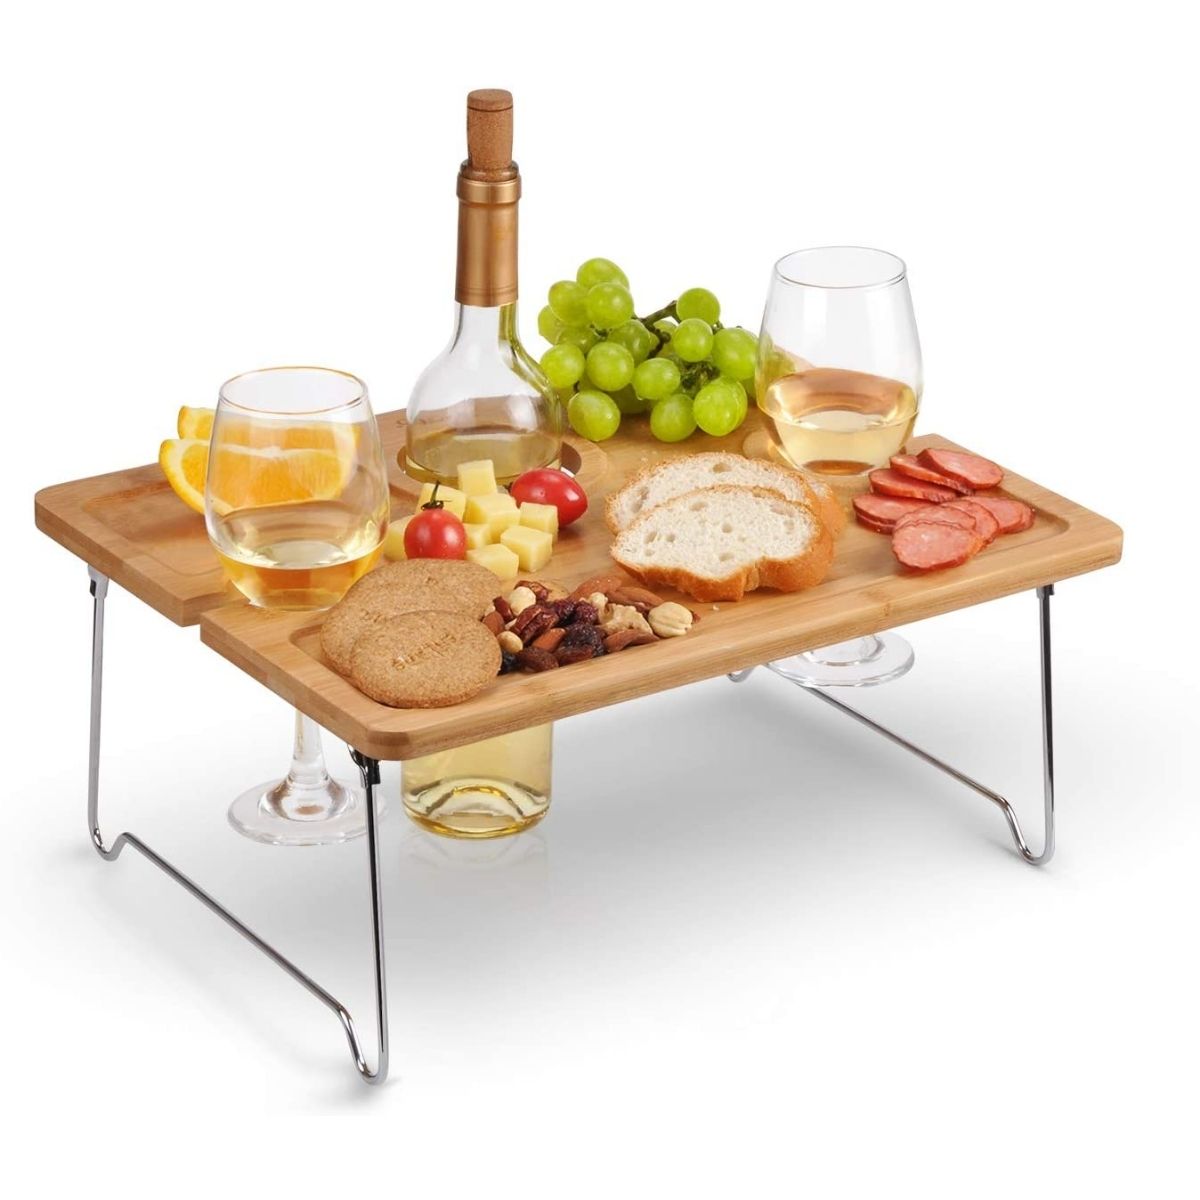 The Best Gifts for Wine Lovers Option: Tirrinia Outdoor Wine Picnic Table